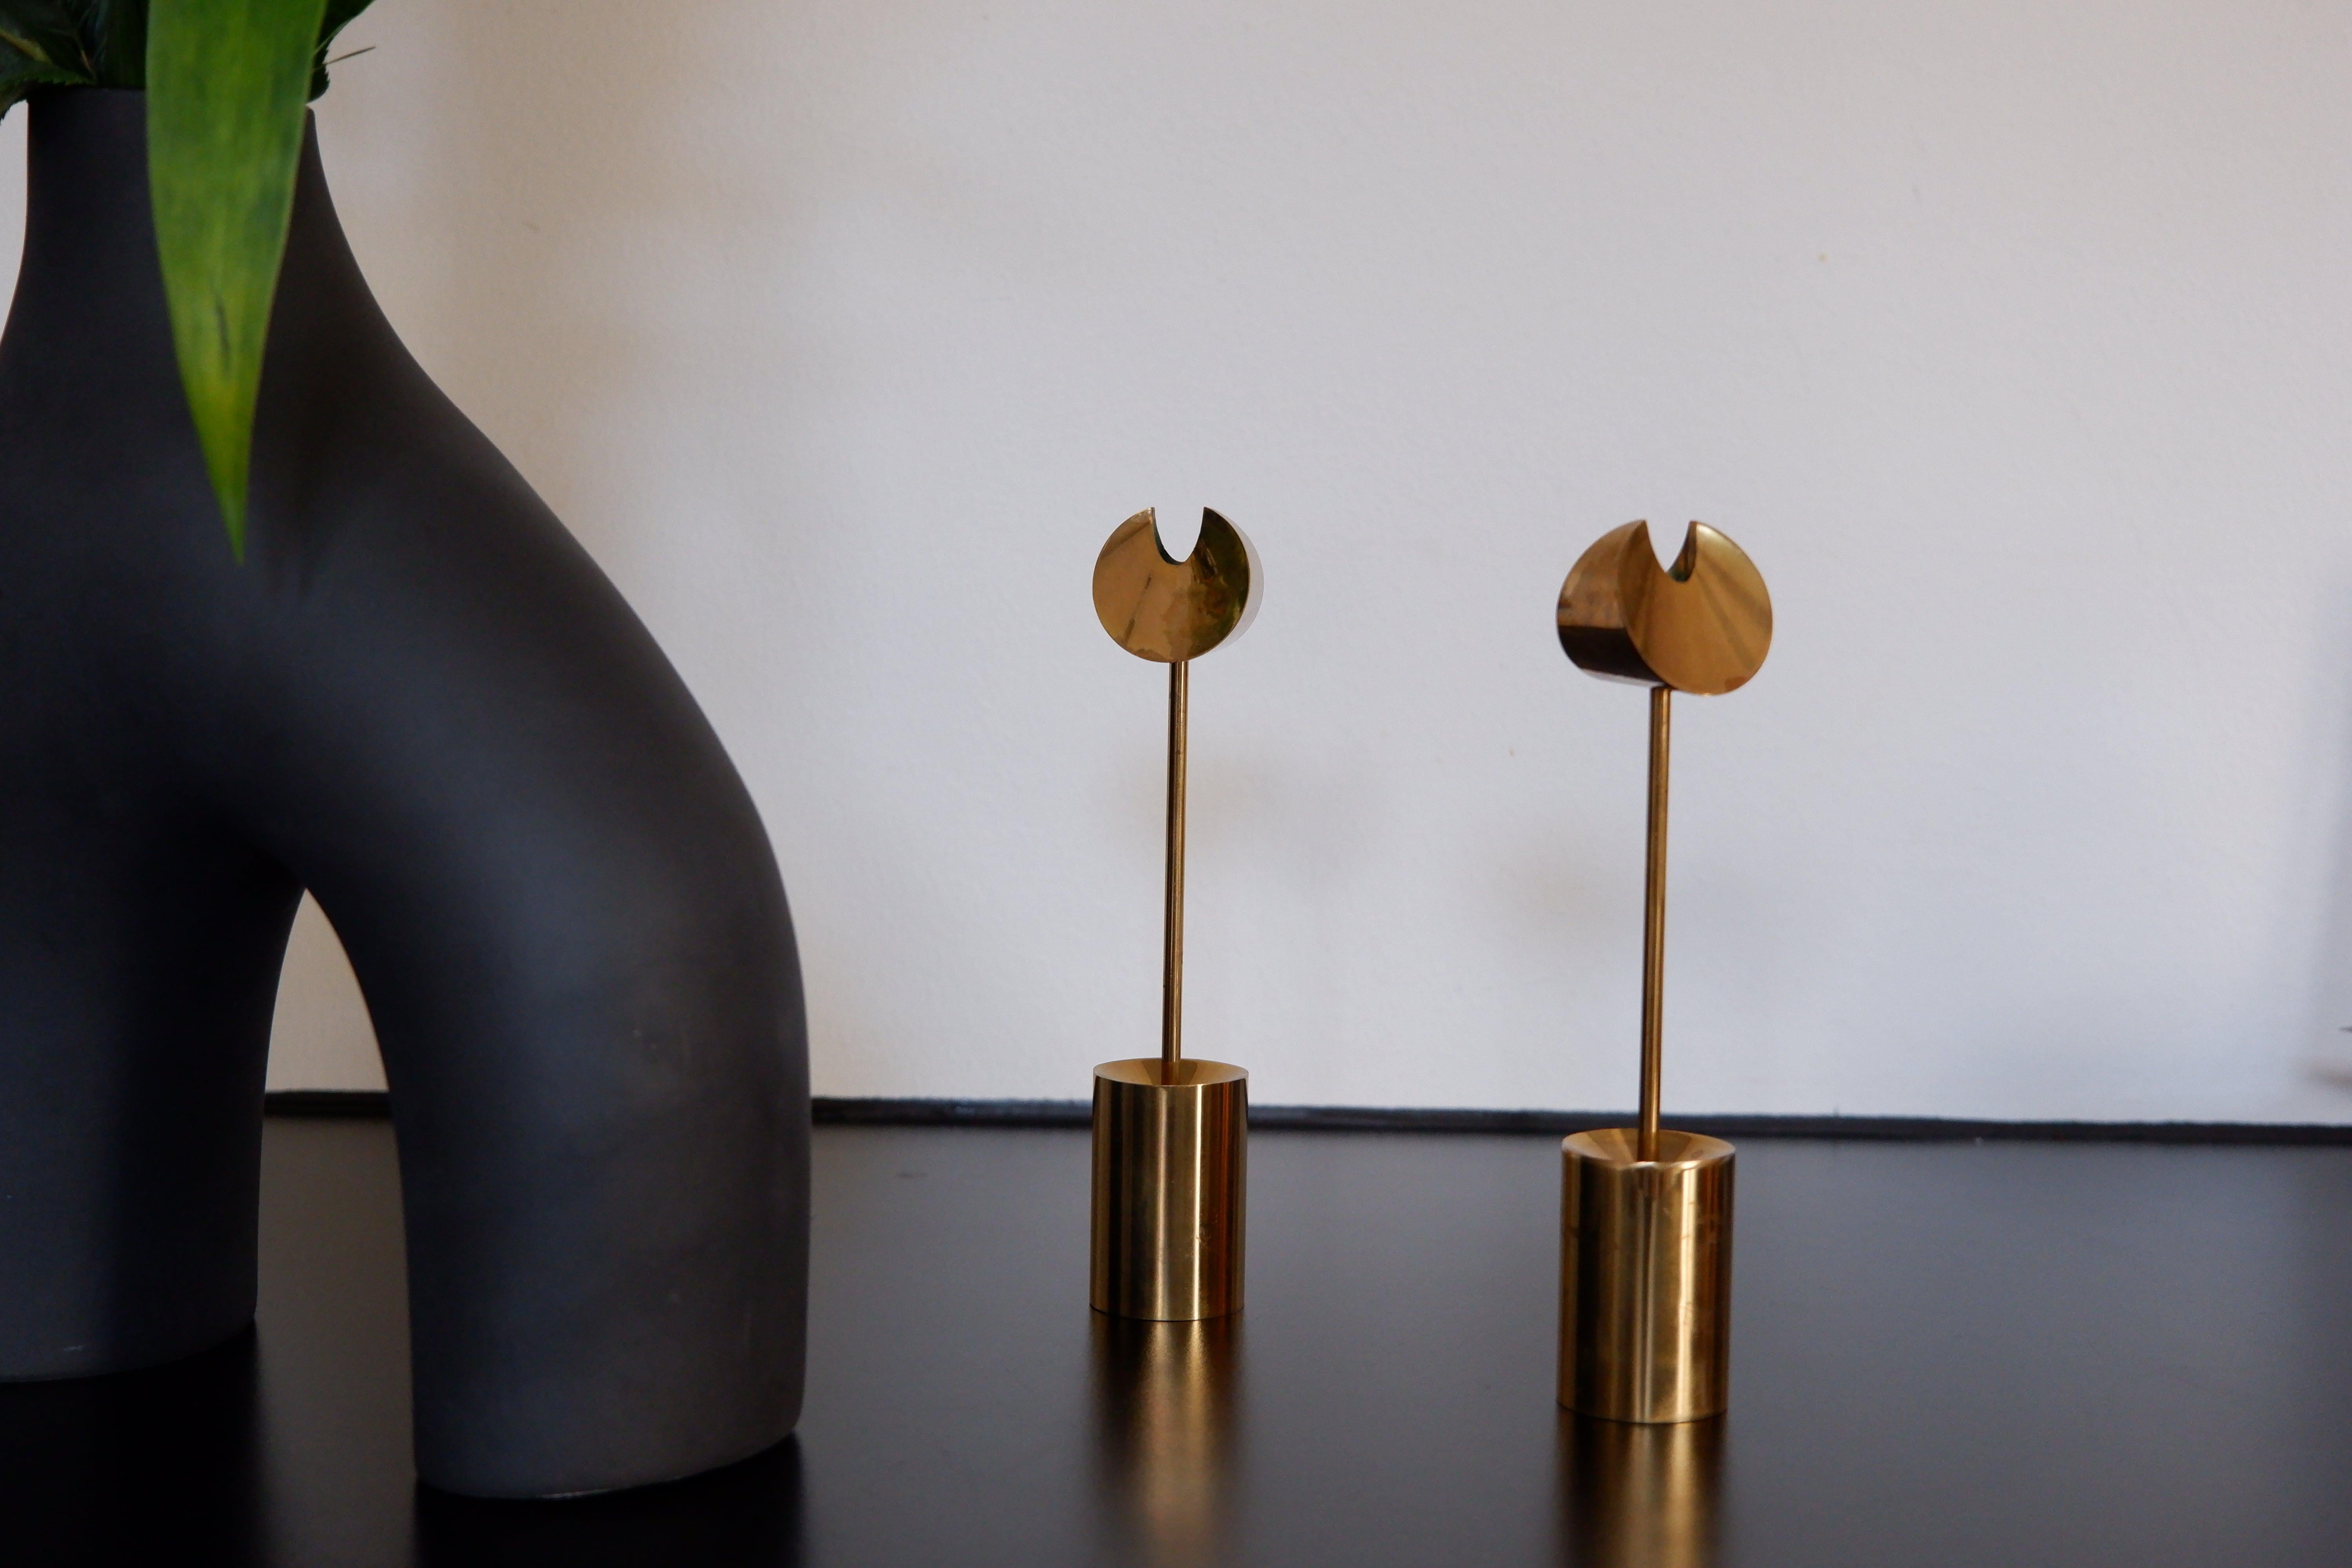 Swedish Pierre Forssell Pair of Aniara Candel Stick Holders, Skultuna, circa 1970 For Sale